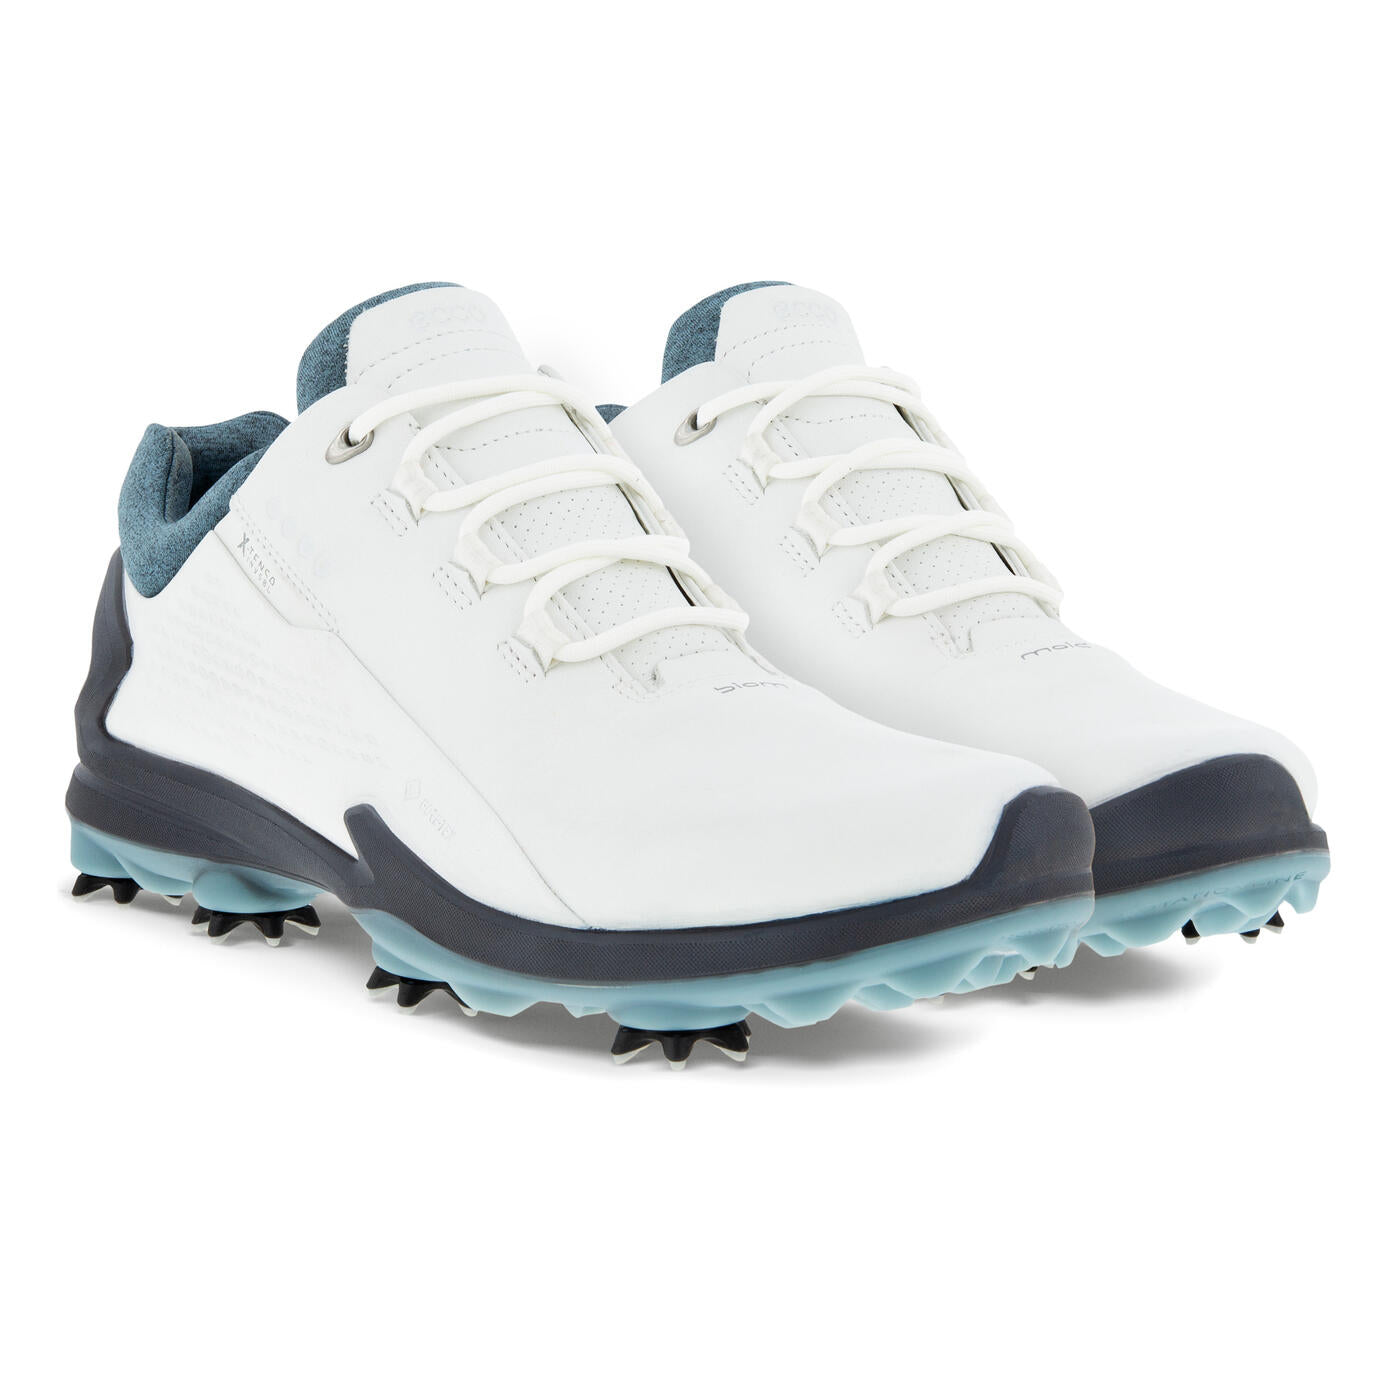 Ecco Mens Biom G3 Cleated Golf Shoes